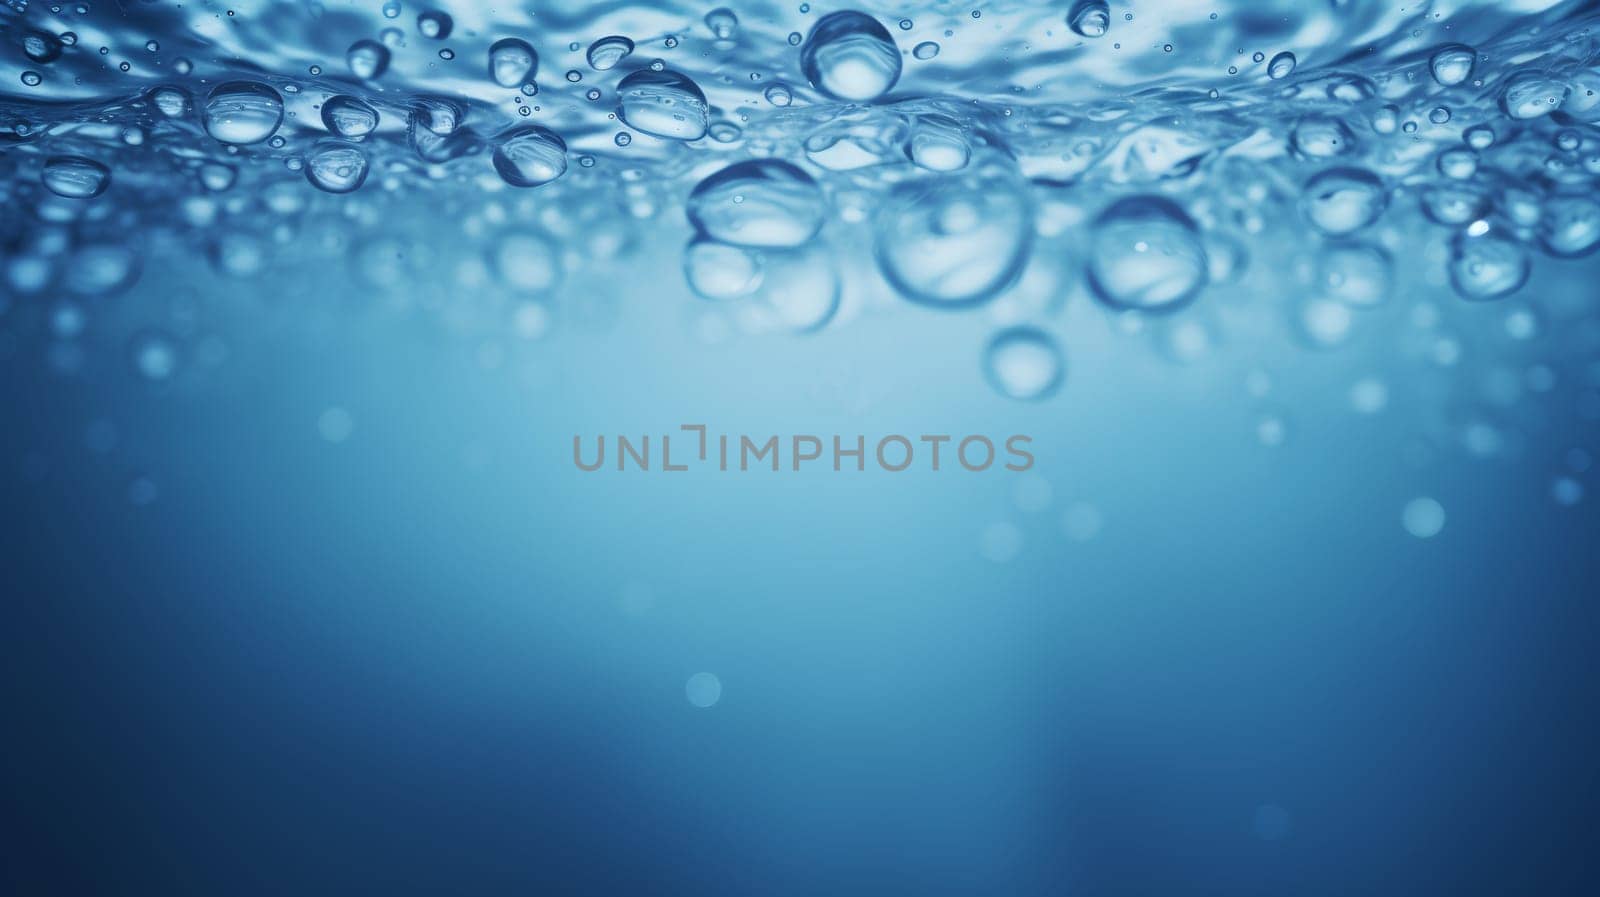 Underwater Air Bubbles Rising to the Surface in Natural Light by chrisroll